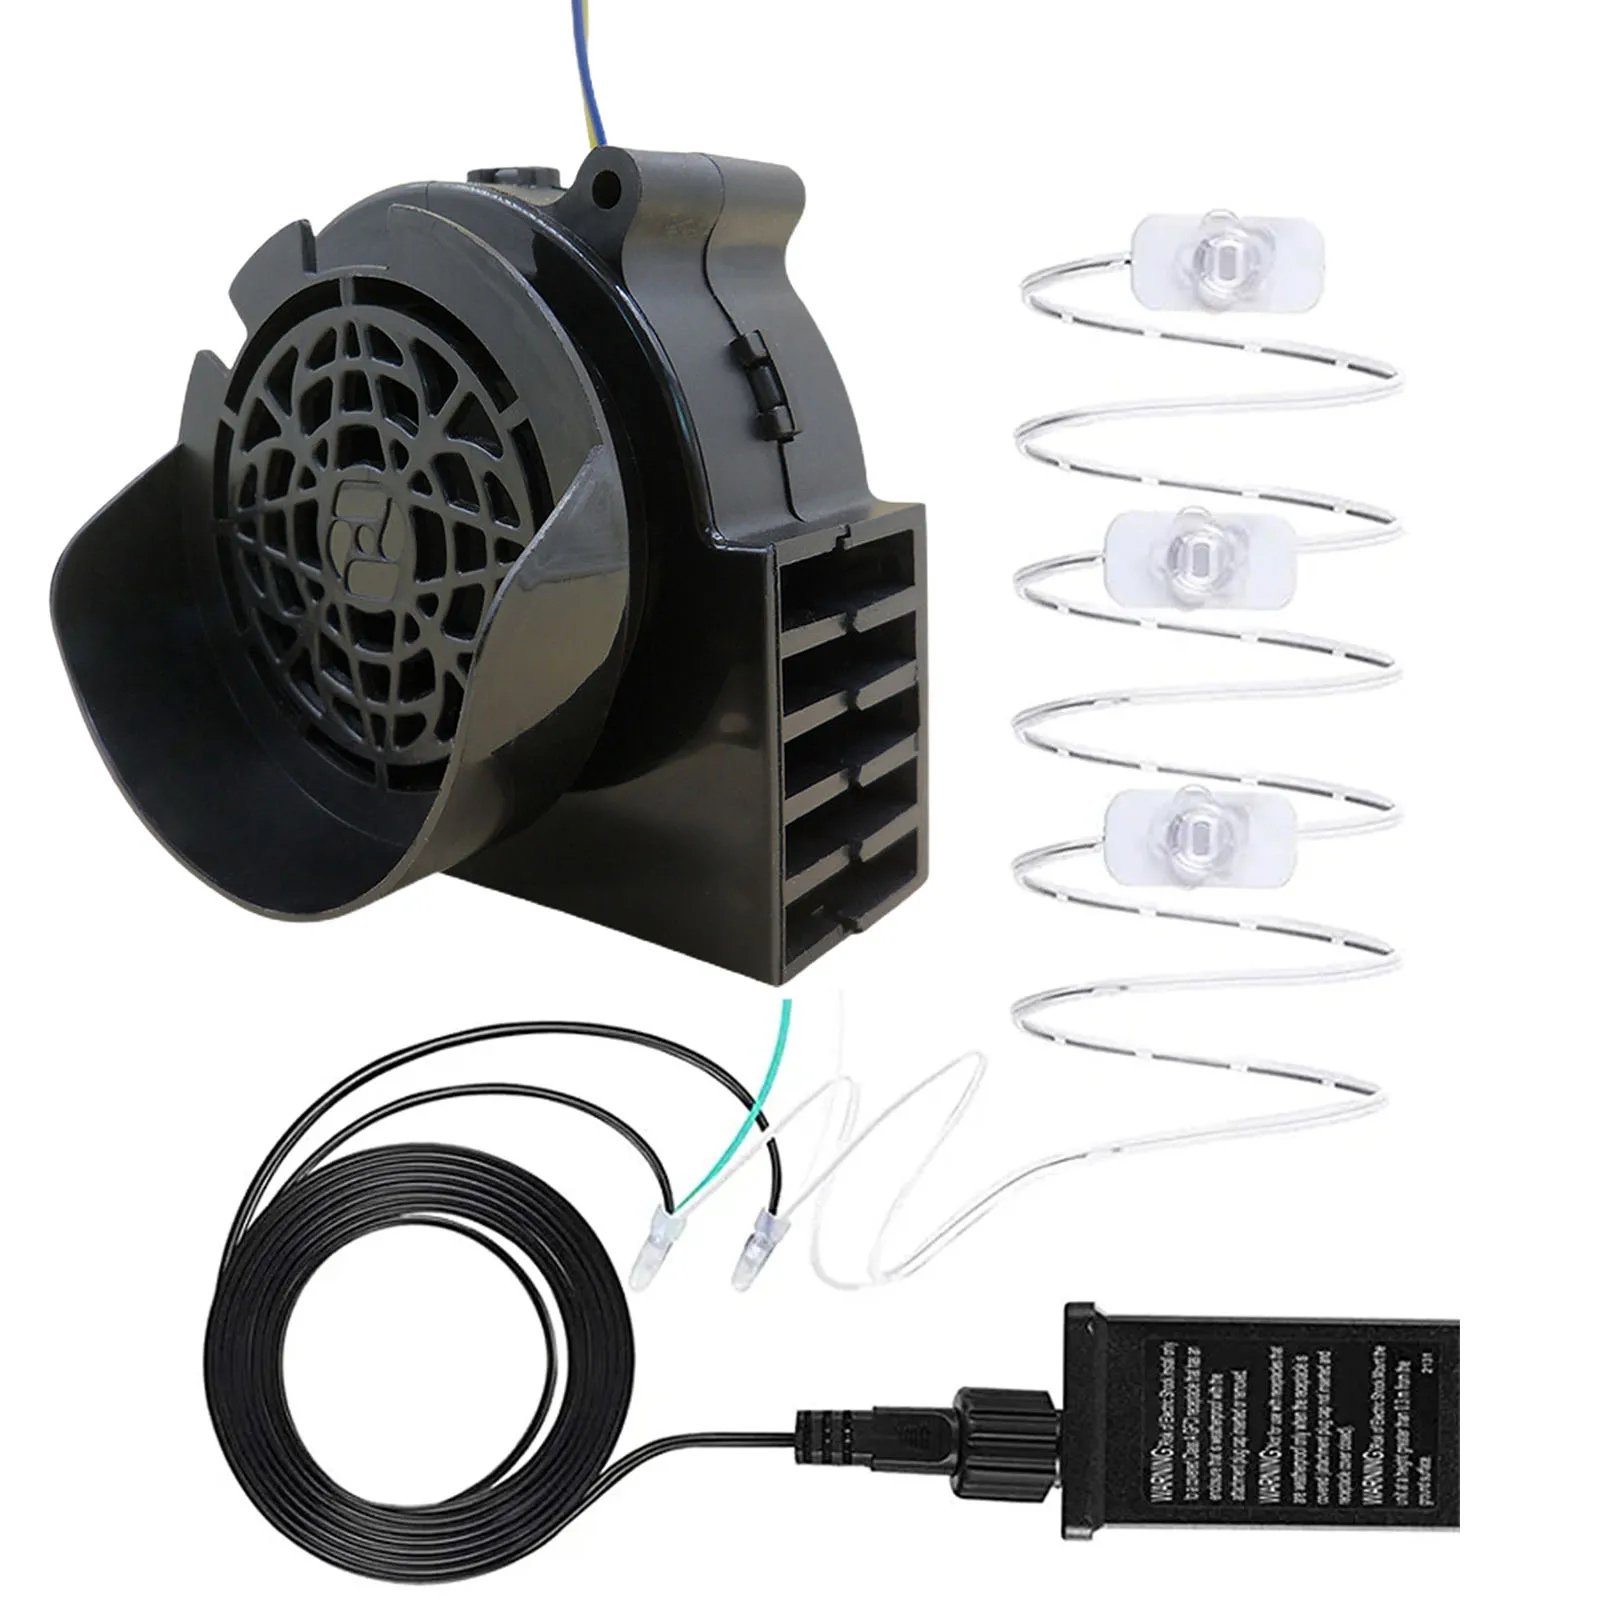 

1Set Fan Blower With 3 LEDs Lig Inflatable Decor 12V 0.5A For 7530 Blower Small Blowing For Garden Yard